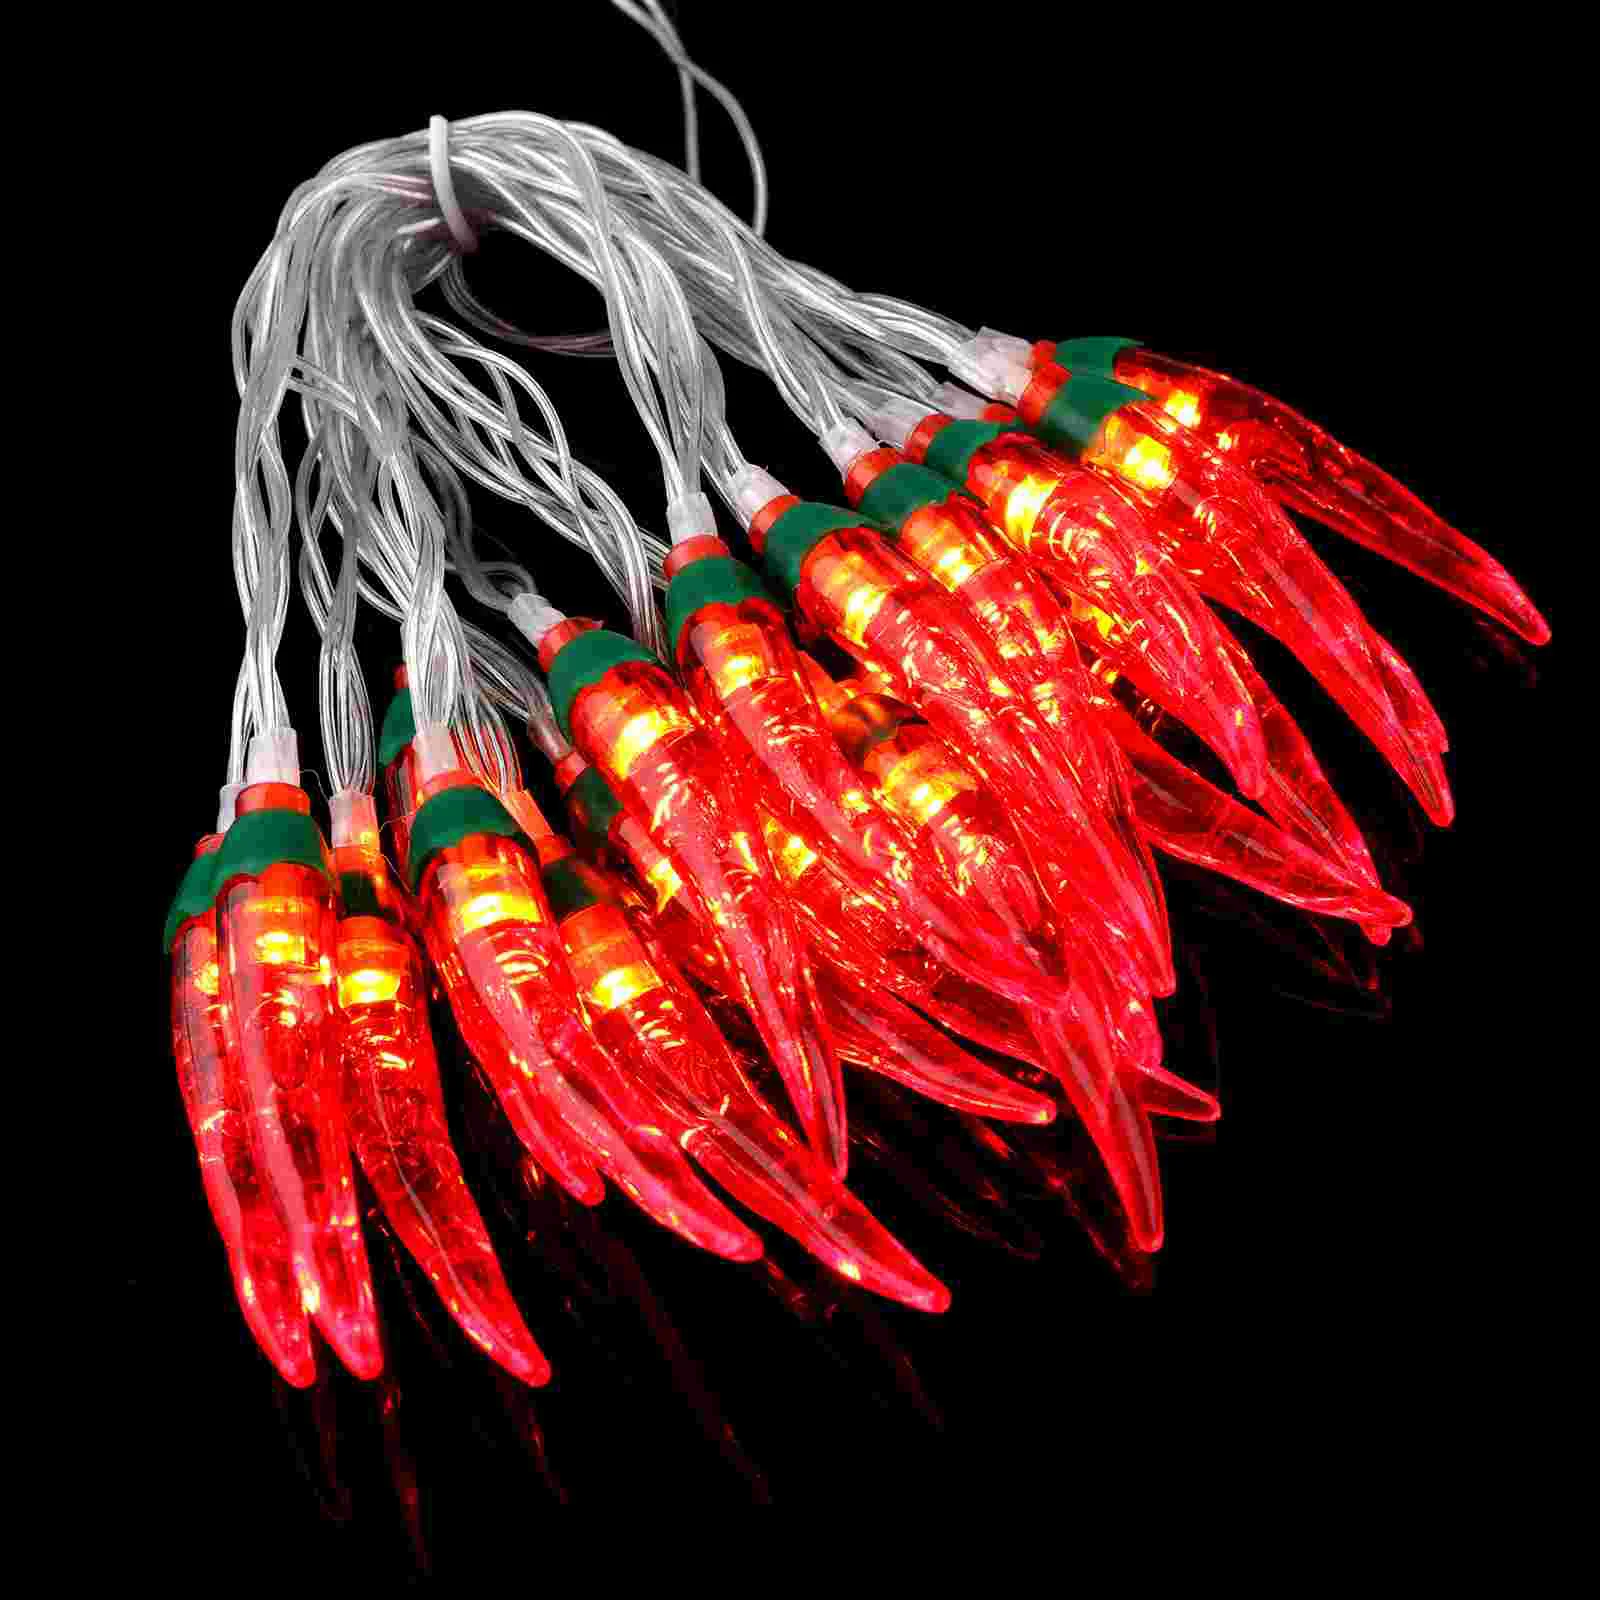 

Chili String Lights 20 LEDs Powered Pepper Lights Decorations for Patio Fence Deck Balcony Camping (Red)